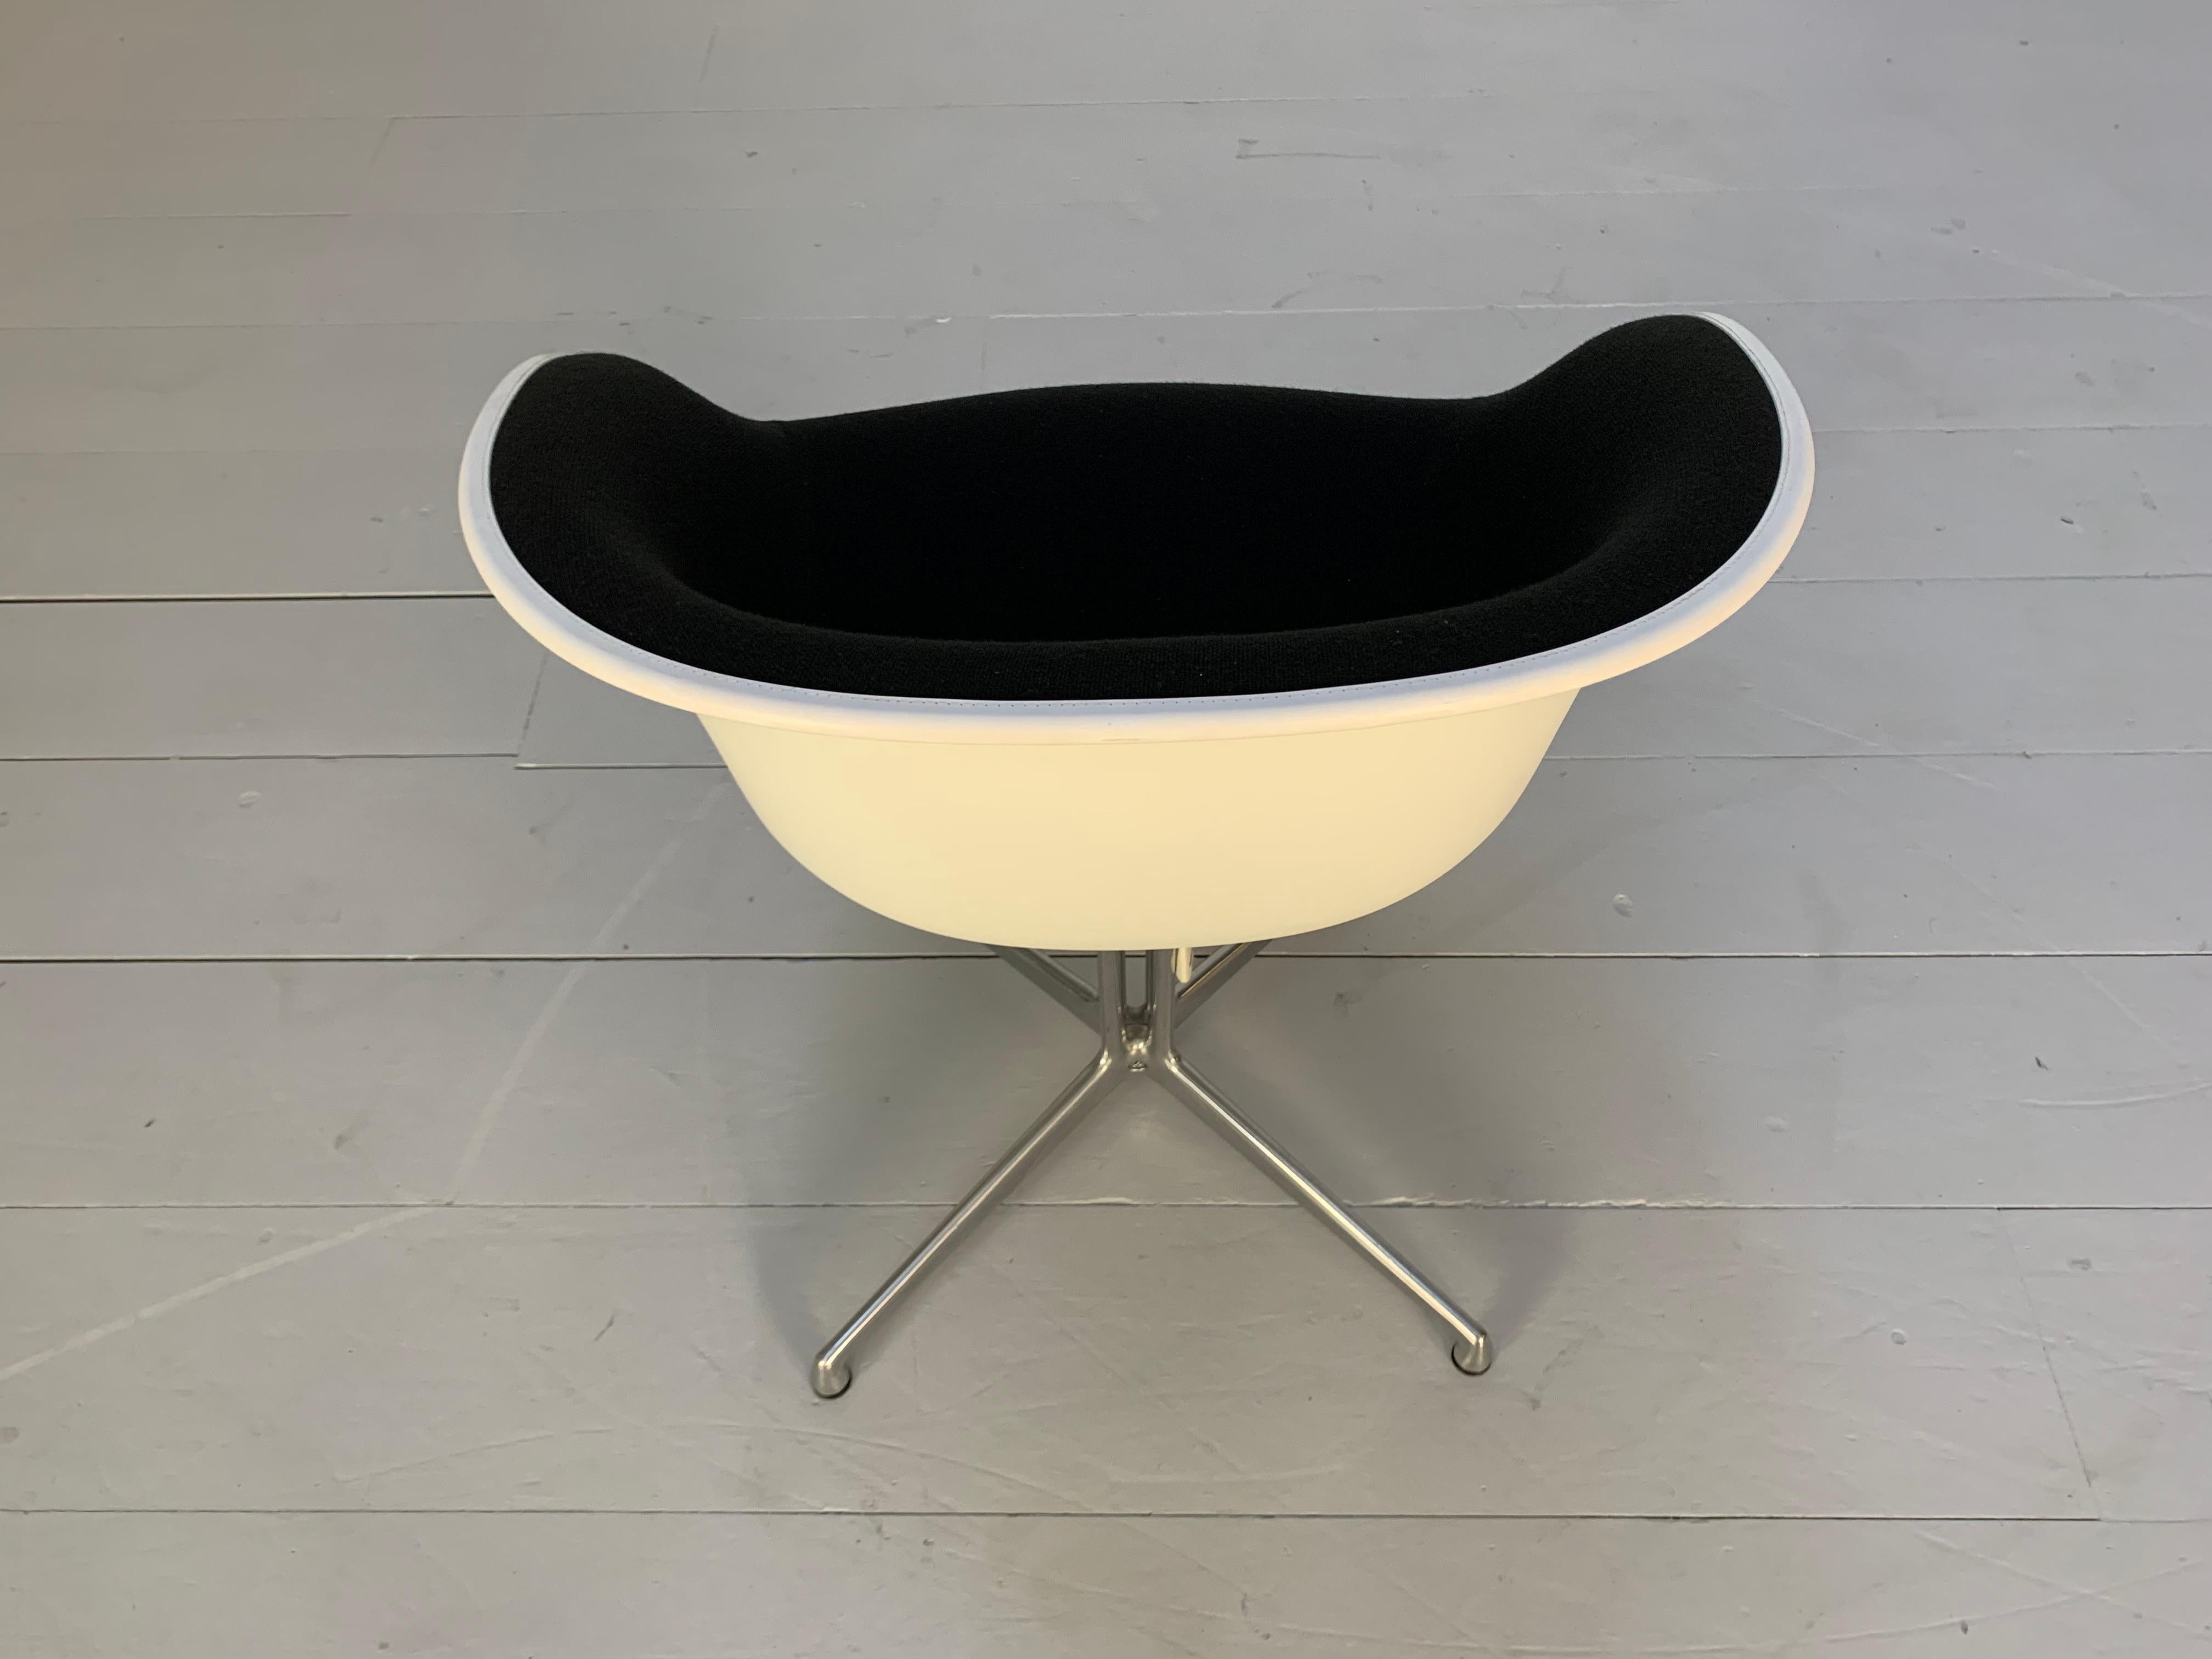 Vitra “La Fonda” Eames Chair & Marble Table in Black Hopsack For Sale 7